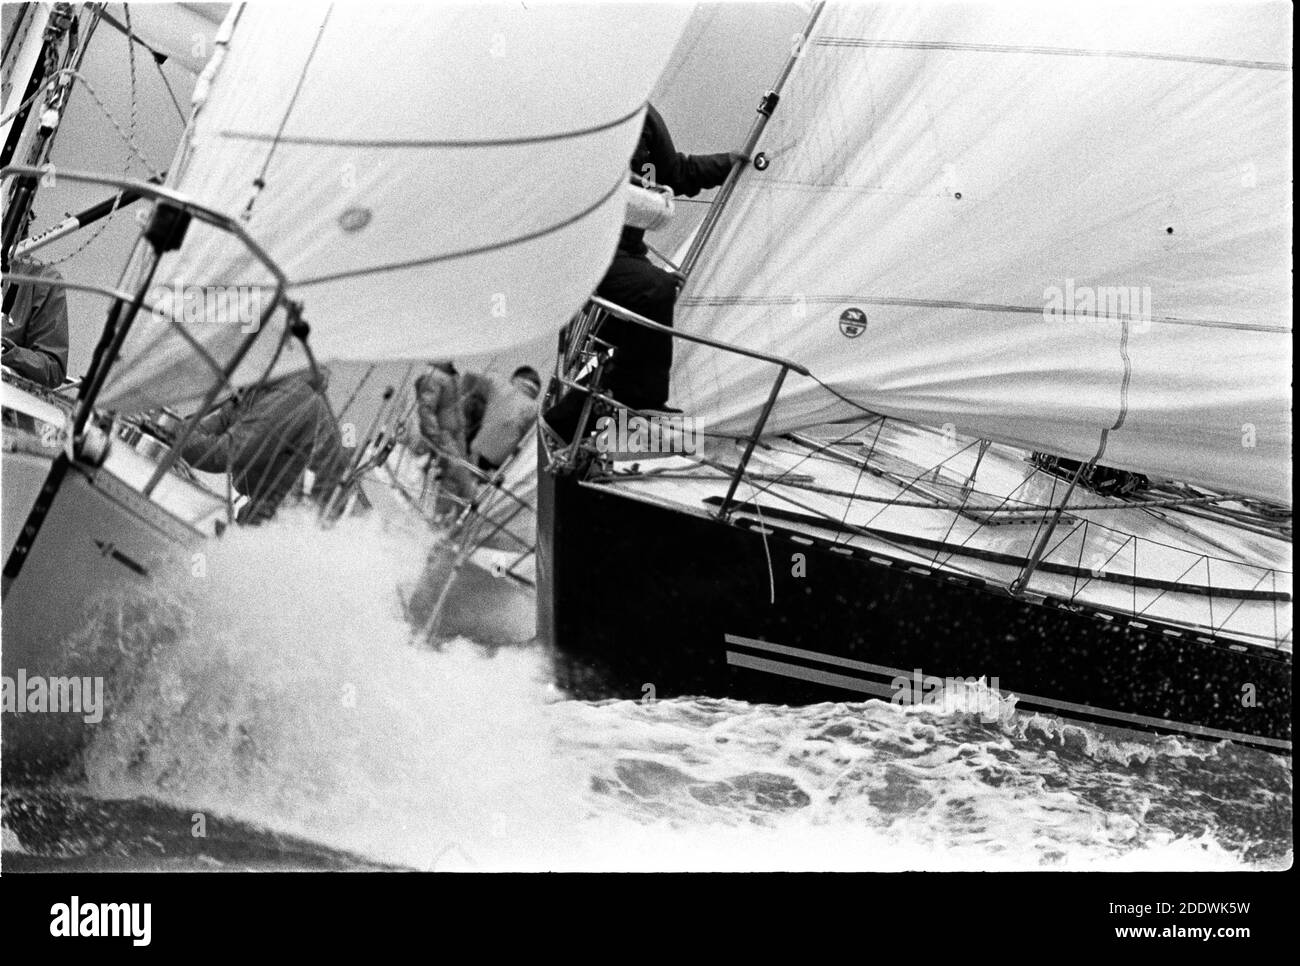 AJAXNETPHOTO. JULY,1979. COWES, ENGLAND. - ADMIRAL'S CUP -  START OF THE FIRST INSHORE RACE ON THE ROYAL YACHT SQUADRON LINE OFF COWES. PHOTO:JONATHAN EASTLAND/AJAX REF:7902081 6 Stock Photo